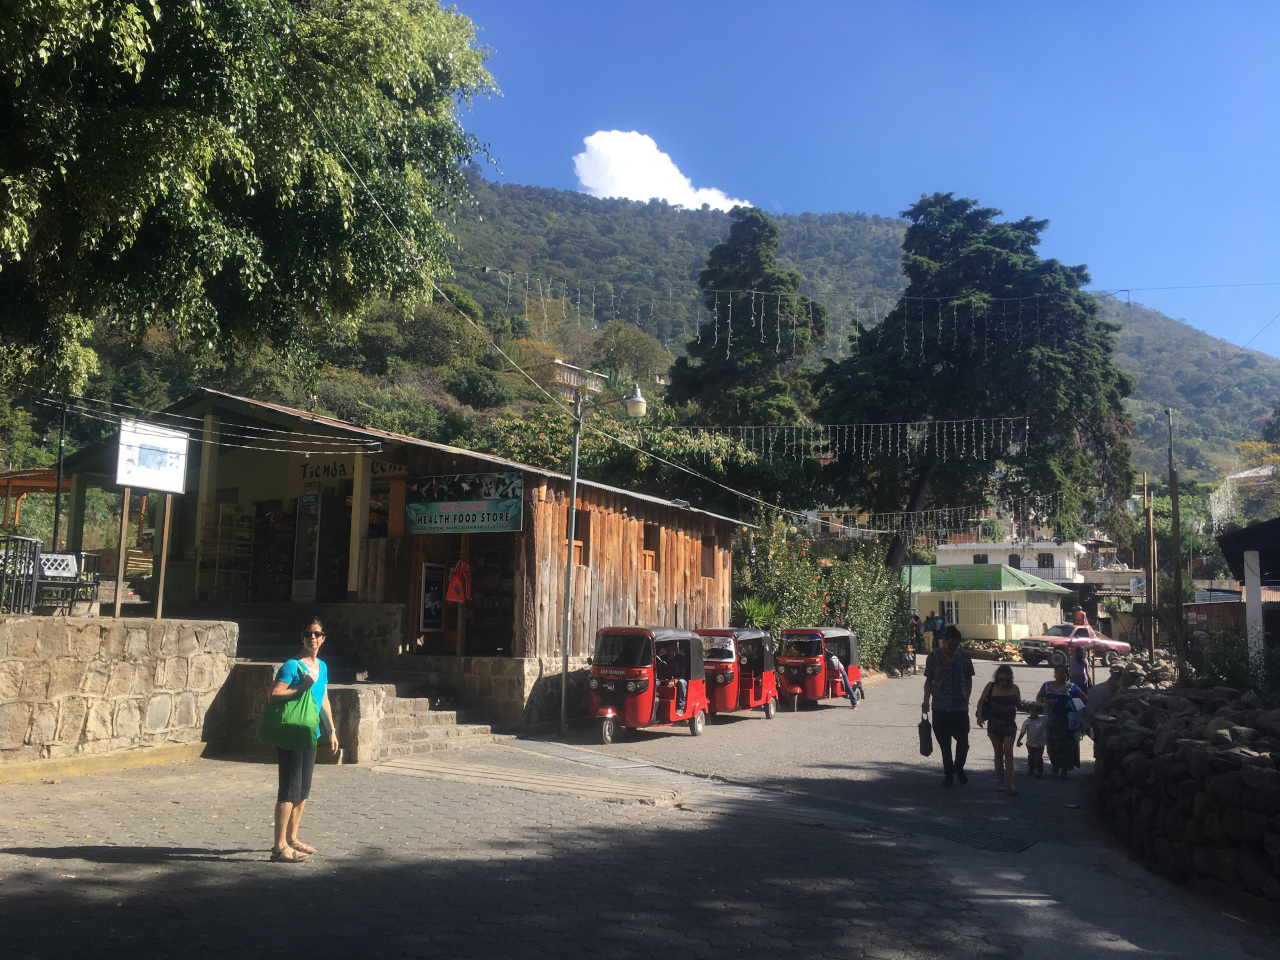 San Marcos la Laguna is one of the best places to visit in Lake Atitlan during your 7-day itinerary for Lake Atitlan